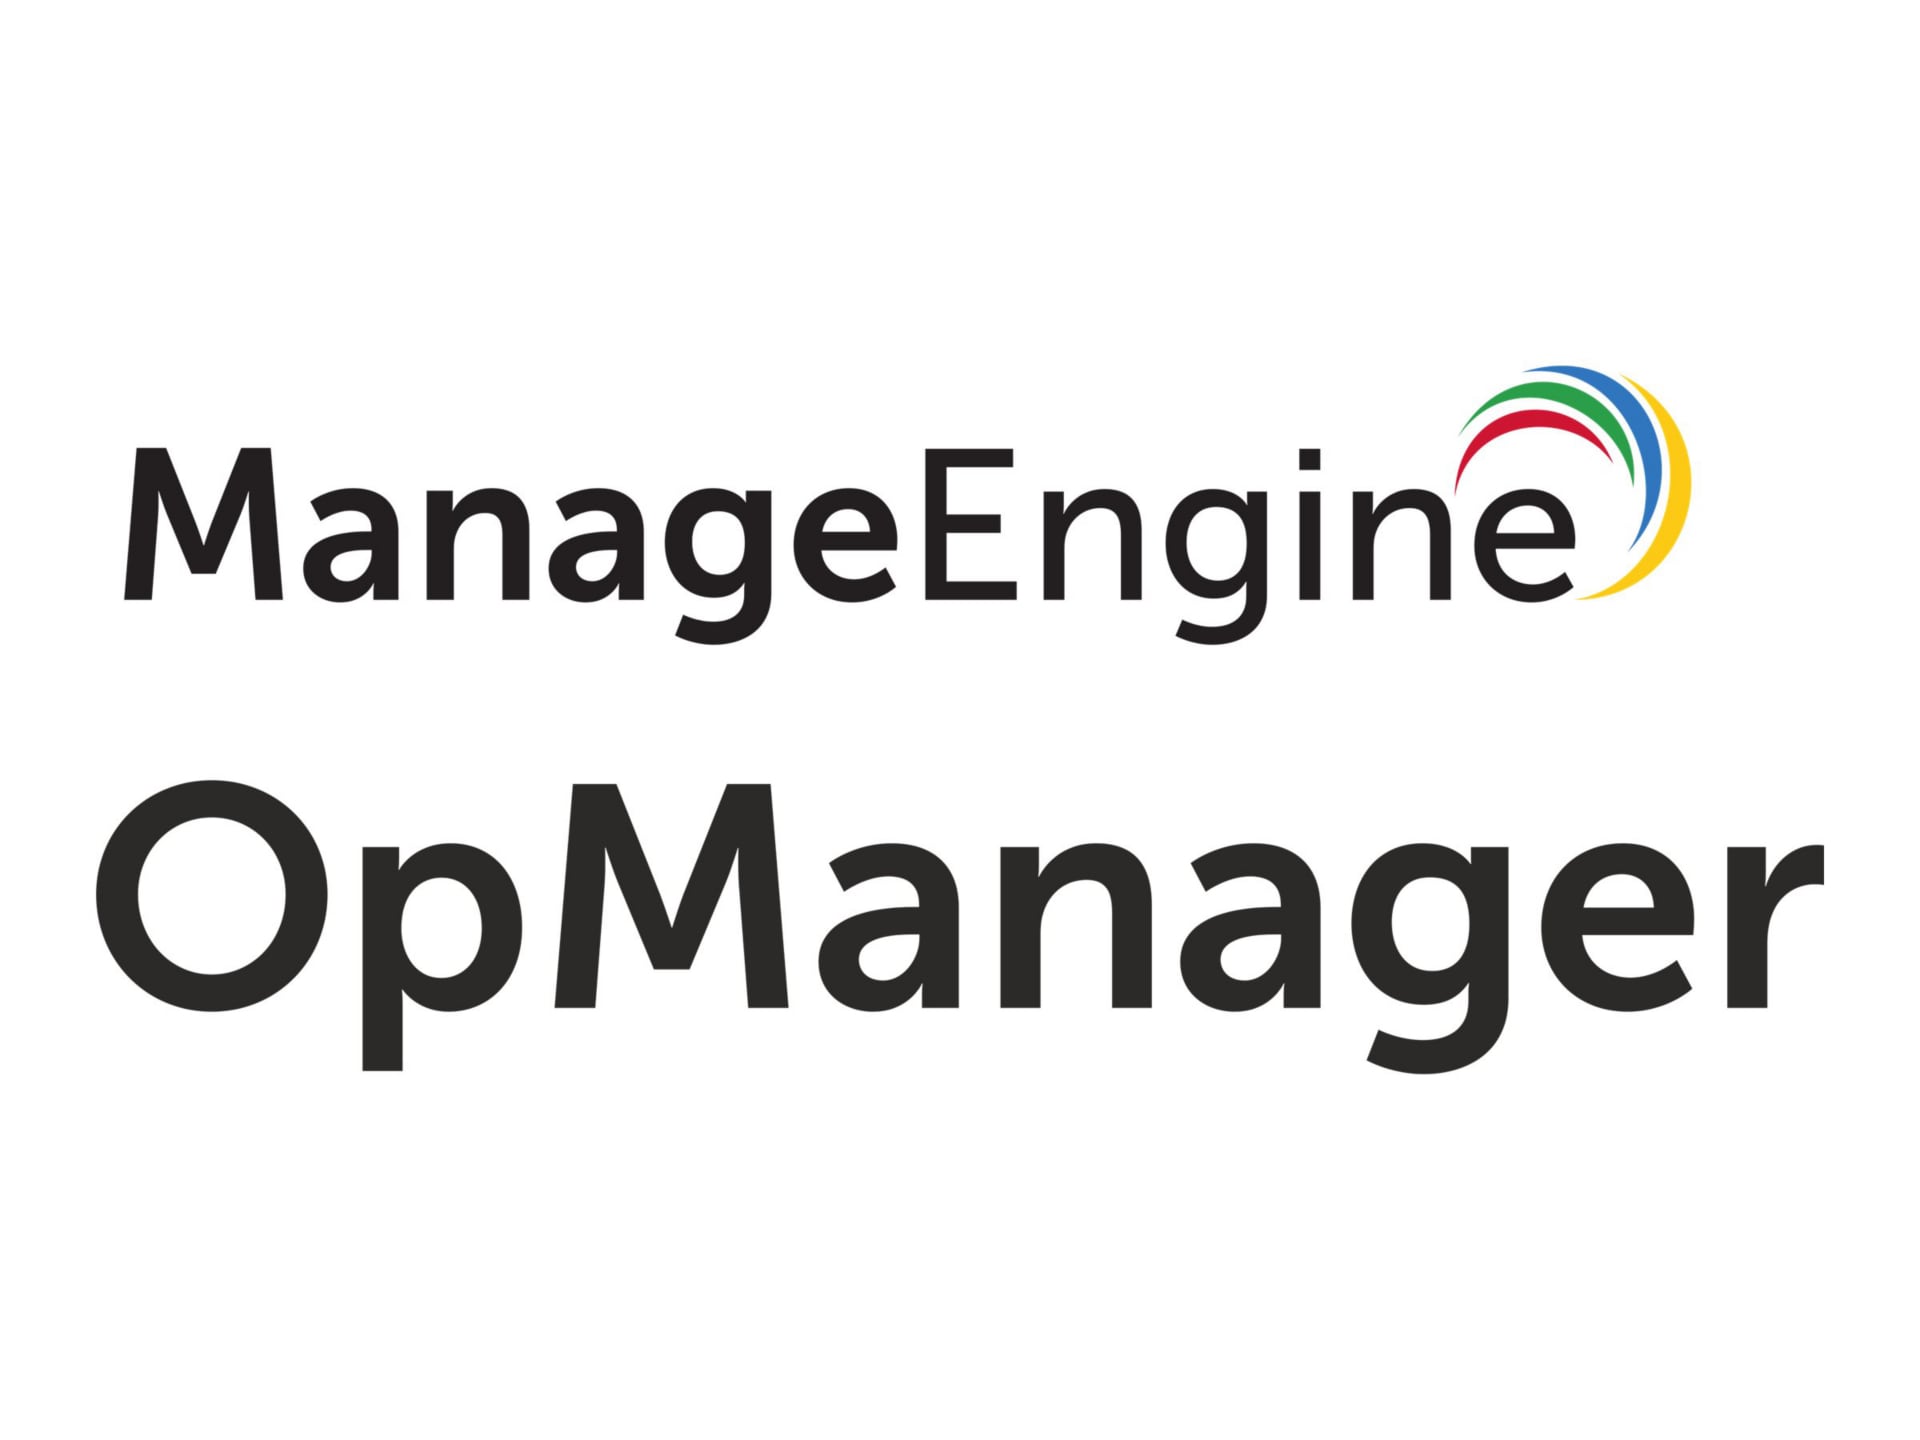 ManageEngine OpManager IPAM & SPM Add-on - subscription license (1 year) -